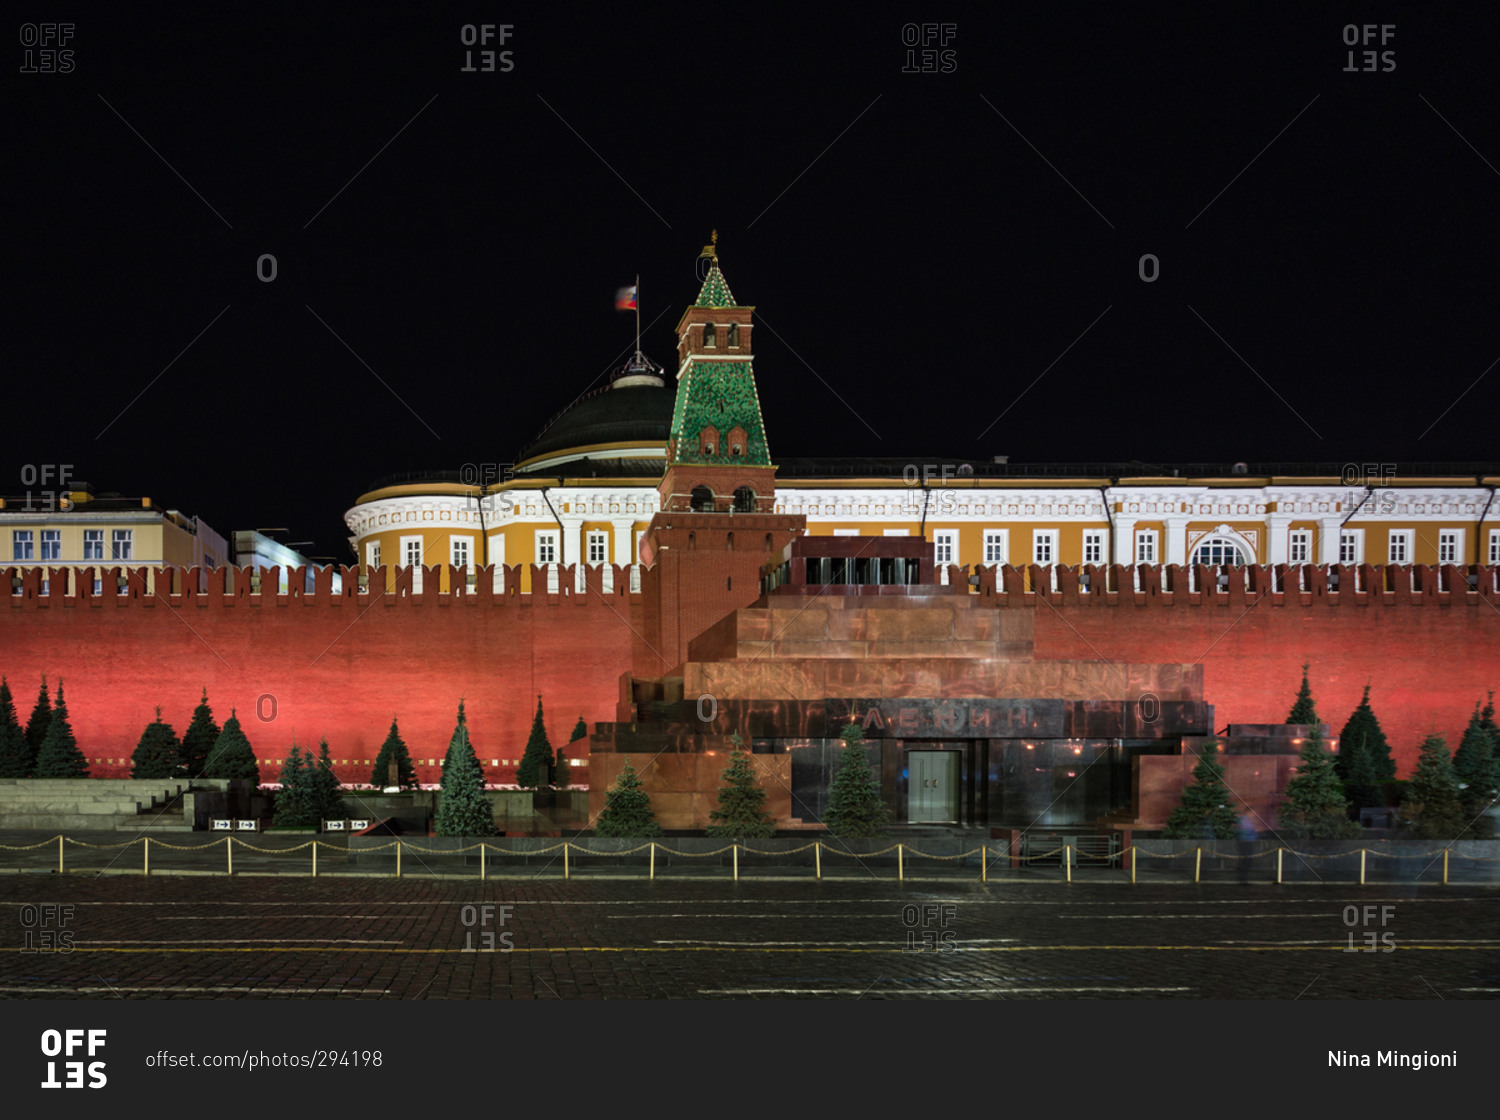 Lenin's Tomb stands in Moscow's Red Square with the brick-walled Kremlin in background